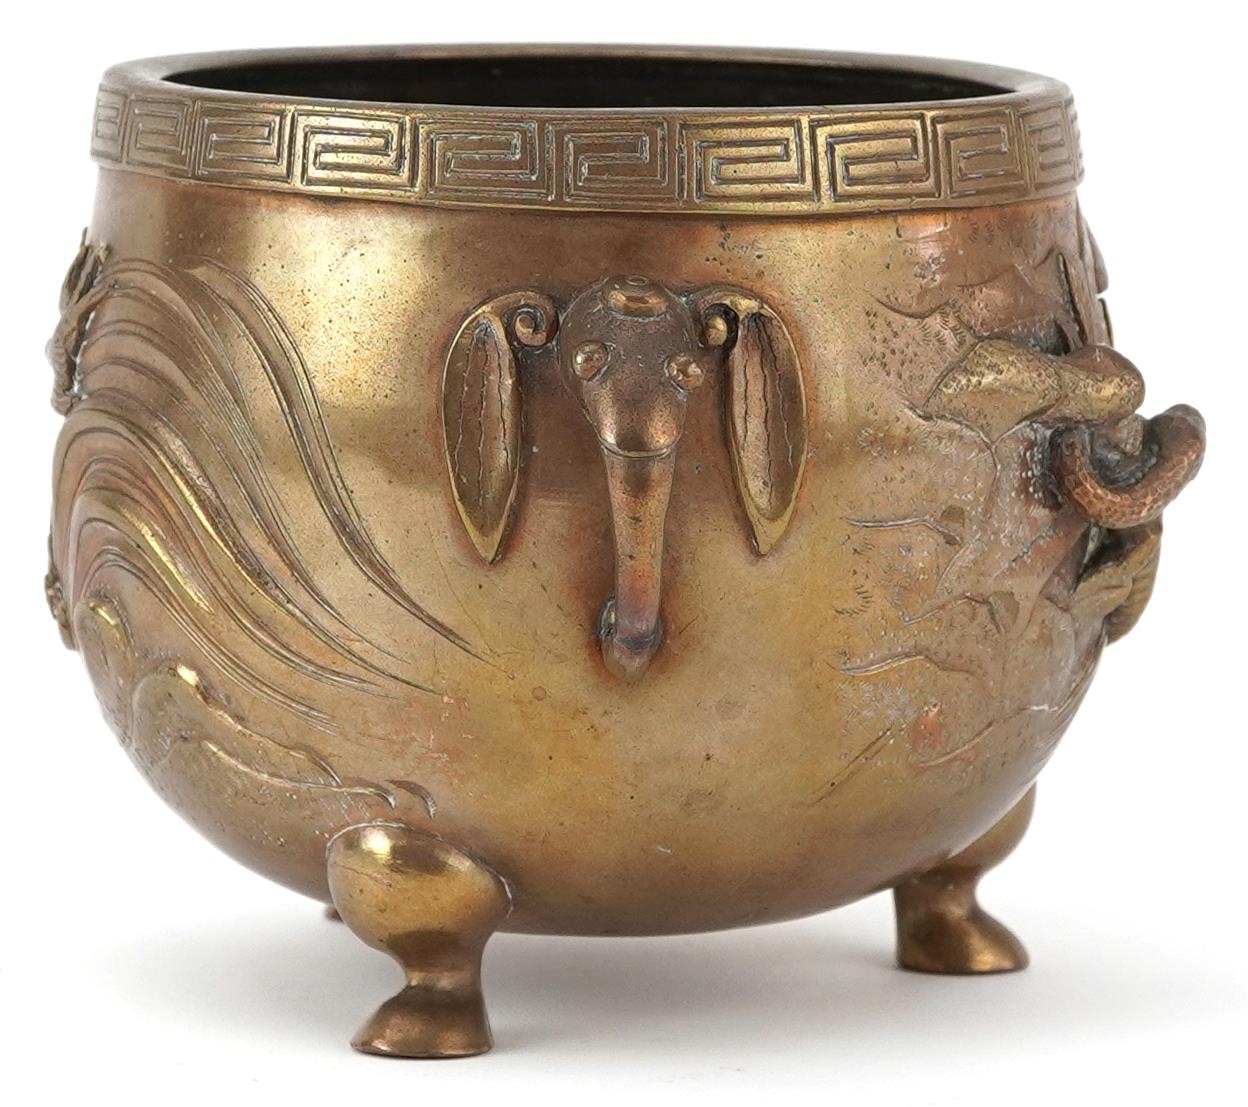 Japanese patinated bronze three footed censer with twin handles decorated in relief with serpents - Image 4 of 7